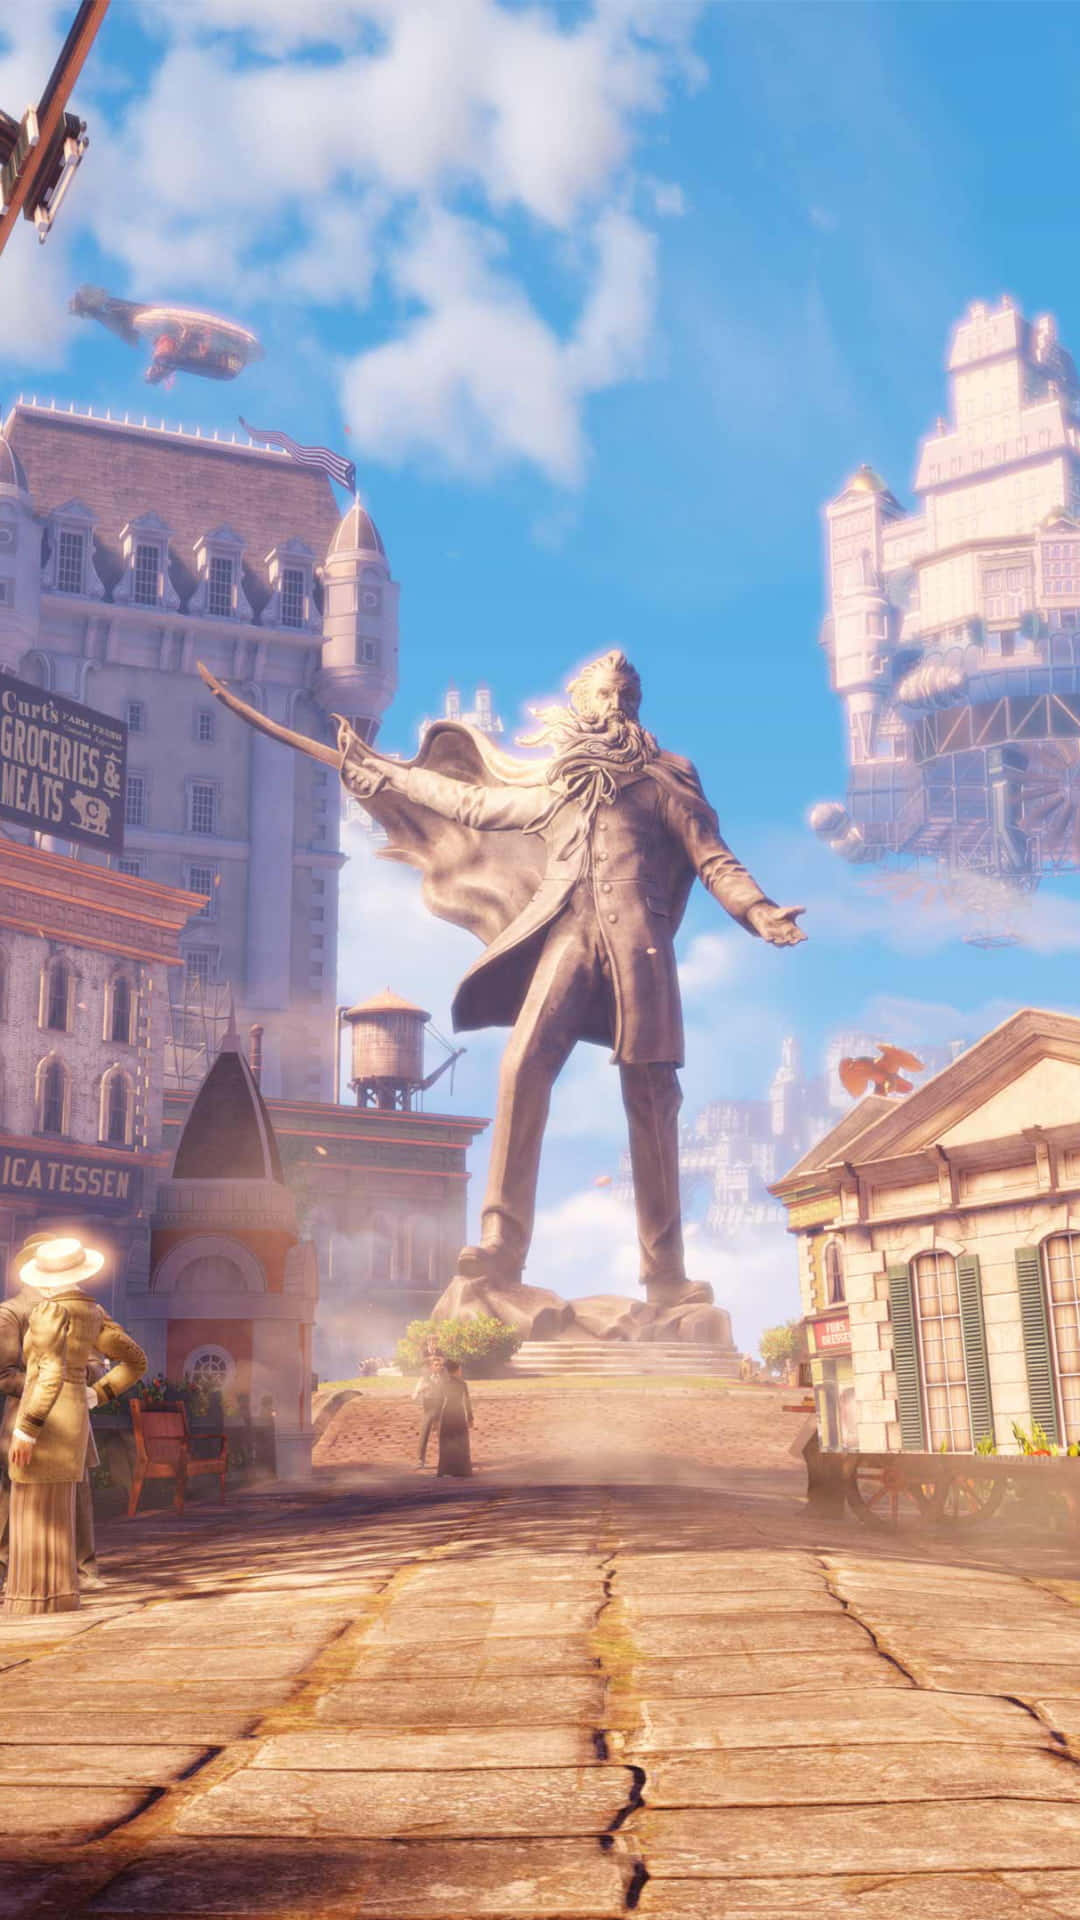 Iphone X Bioshock Infinite Background Statue Of A Man Holding Sword